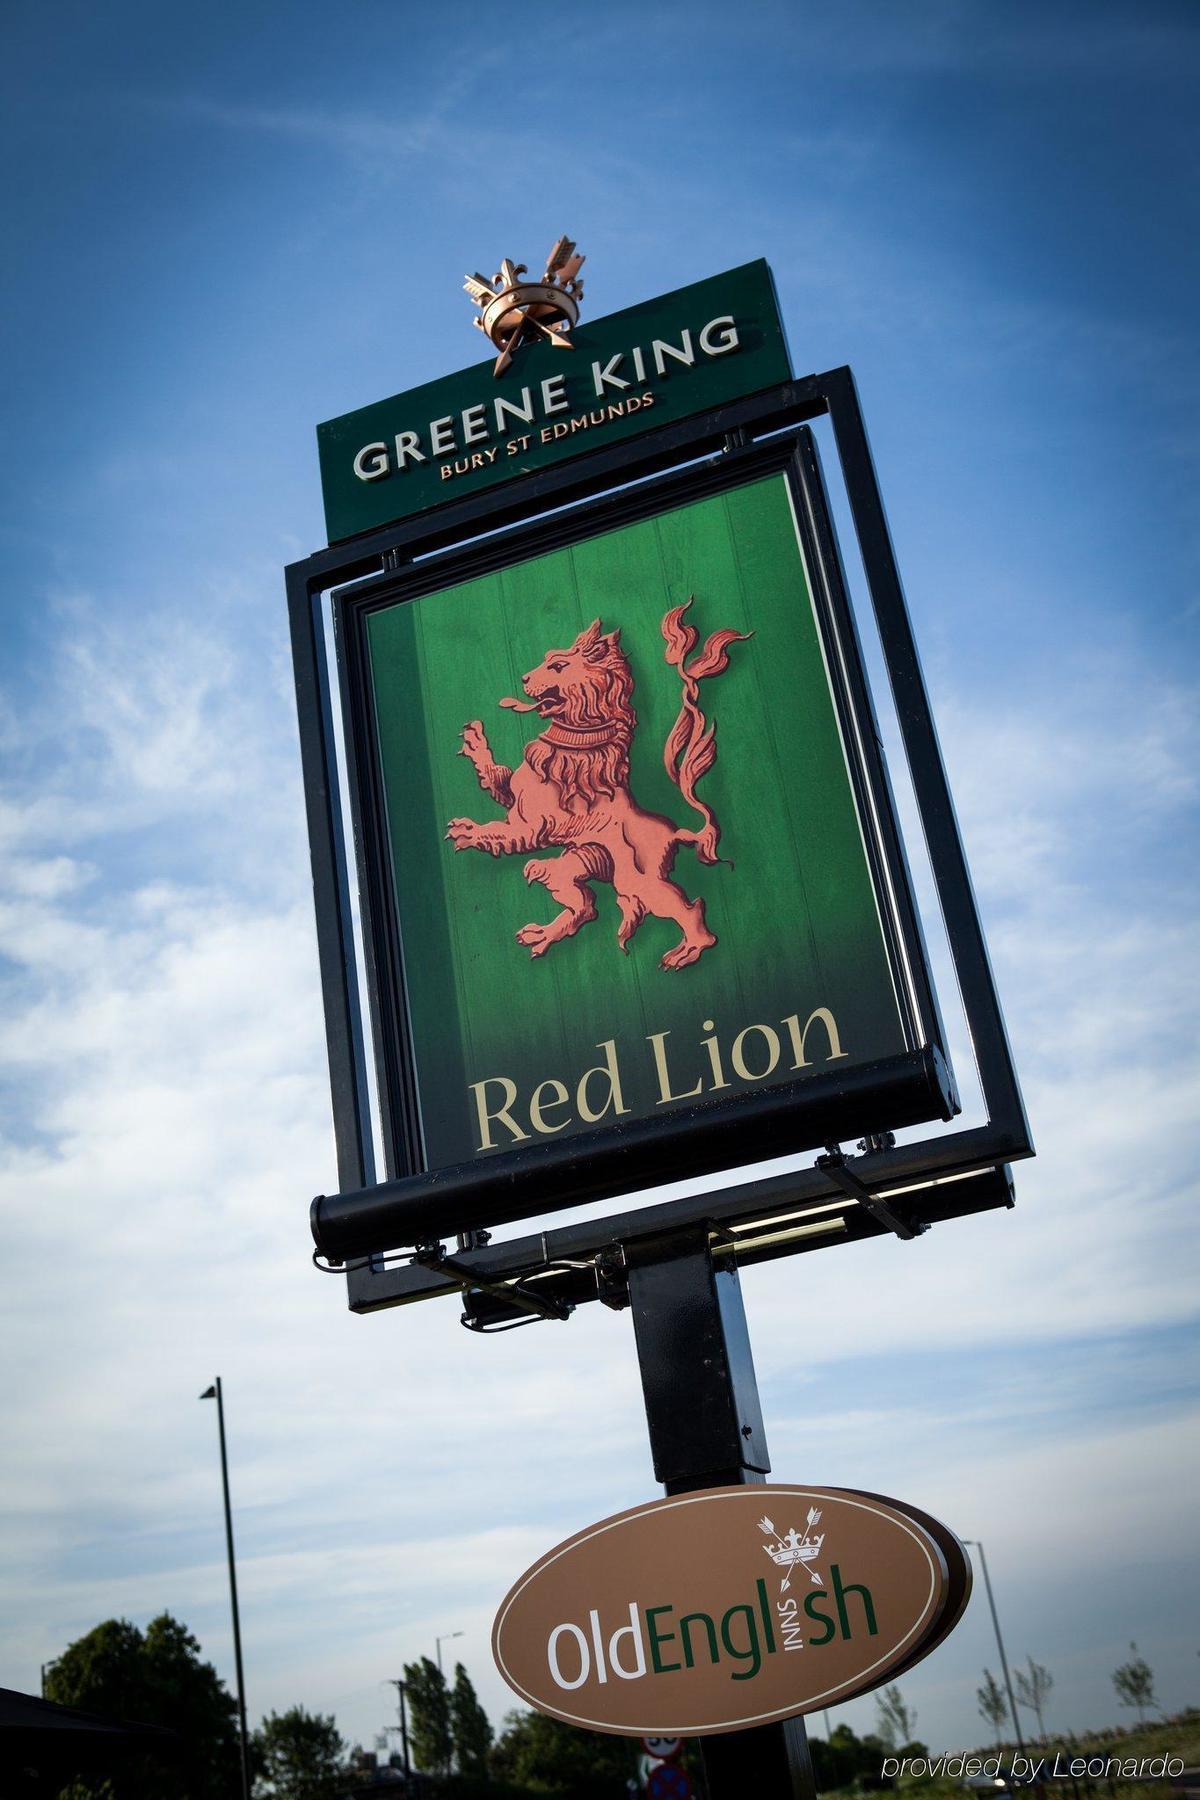 The Red Lion Inn By Chef & Brewer Collection Todwick Екстериор снимка